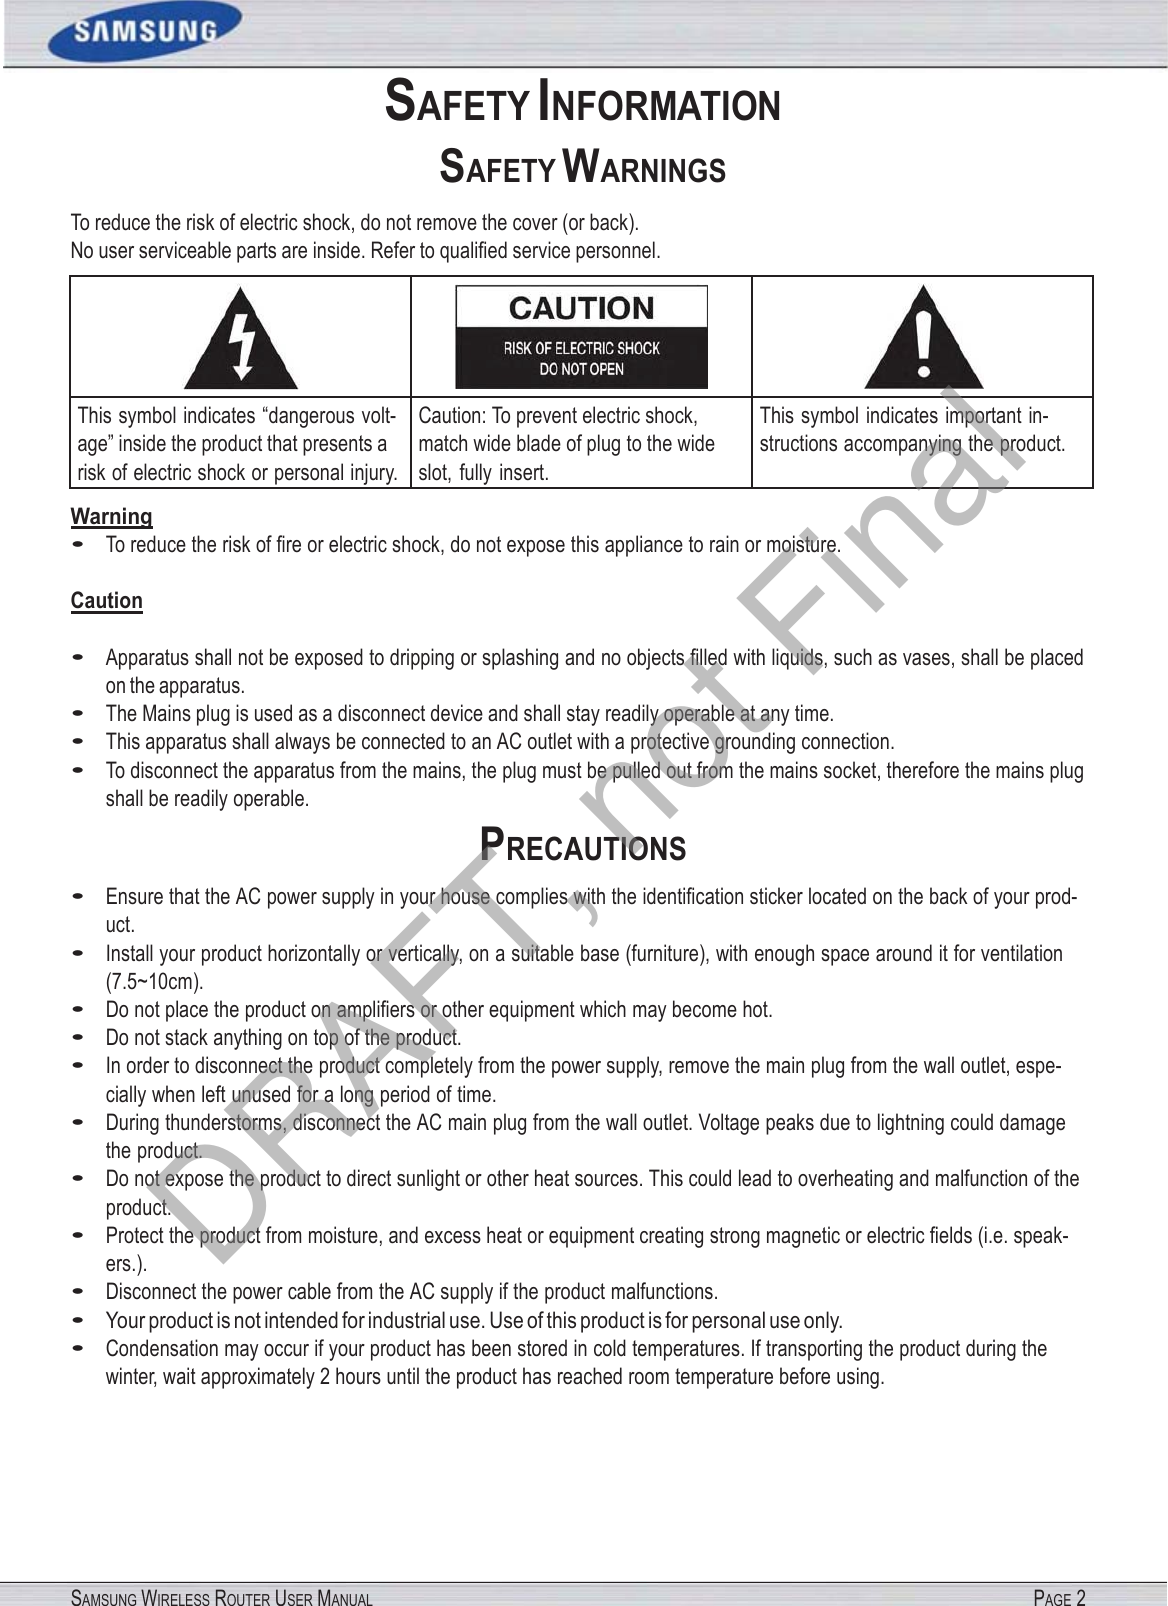 SAMSUNG WIRELESS ROUTER USER MANUAL PAGE 2 SAFETY INFORMATION SAFETY WARNINGS To reduce the risk of electric shock, do not remove the cover (or back). No user serviceable parts are inside. Refer to qualiﬁed service personnel.    This symbol indicates “dangerous volt- age” inside the product that presents a risk of electric shock or personal injury. Caution: To prevent electric shock, match wide blade of plug to the wide slot,  fully  insert. This symbol indicates important in- structions accompanying the product. Warning • To reduce the risk of ﬁre or electric shock, do not expose this appliance to rain or moisture. Caution • Apparatus shall not be exposed to dripping or splashing and no objects ﬁlled with liquids, such as vases, shall be placed on the apparatus. • The Mains plug is used as a disconnect device and shall stay readily operable at any time. • This apparatus shall always be connected to an AC outlet with a protective grounding connection. • To disconnect the apparatus from the mains, the plug must be pulled out from the mains socket, therefore the mains plug shall be readily operable. PRECAUTIONS • Ensure that the AC power supply in your house complies with the identiﬁcation sticker located on the back of your prod- uct. • Install your product horizontally or vertically, on a suitable base (furniture), with enough space around it for ventilation (7.5~10cm). • Do not place the product on ampliﬁers or other equipment which may become hot. • Do not stack anything on top of the product. • In order to disconnect the product completely from the power supply, remove the main plug from the wall outlet, espe- cially when left unused for a long period of time. • During thunderstorms, disconnect the AC main plug from the wall outlet. Voltage peaks due to lightning could damage the product. • Do not expose the product to direct sunlight or other heat sources. This could lead to overheating and malfunction of the product. • Protect the product from moisture, and excess heat or equipment creating strong magnetic or electric ﬁelds (i.e. speak- ers.). • Disconnect the power cable from the AC supply if the product malfunctions. • Your product is not intended for industrial use. Use of this product is for personal use only. • Condensation may occur if your product has been stored in cold temperatures. If transporting the product during the winter, wait approximately 2 hours until the product has reached room temperature before using. DRAFT, not Final